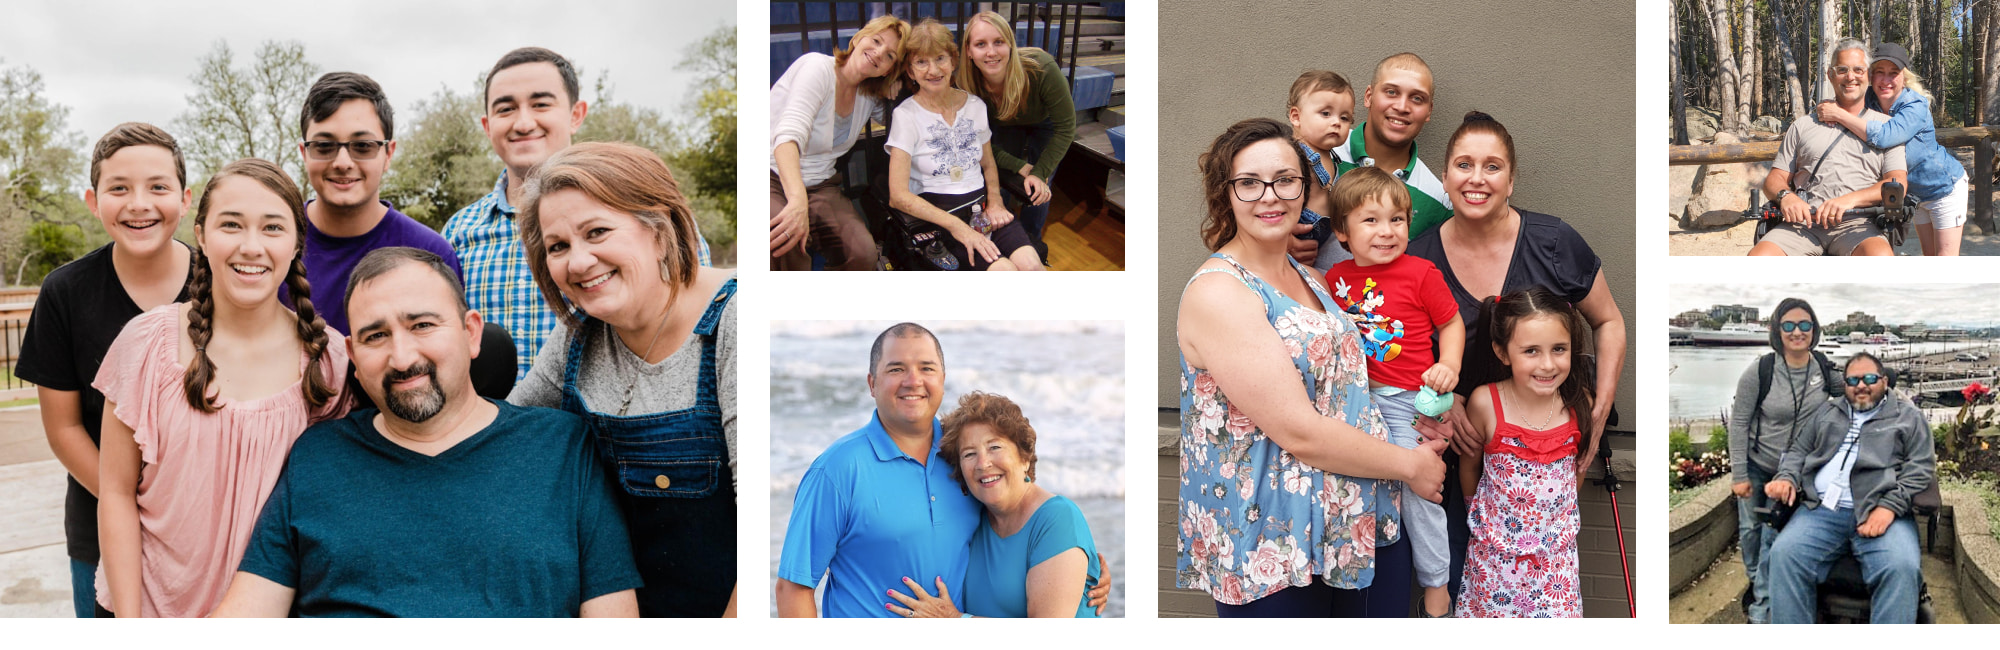 Collage of ALS patients with their families